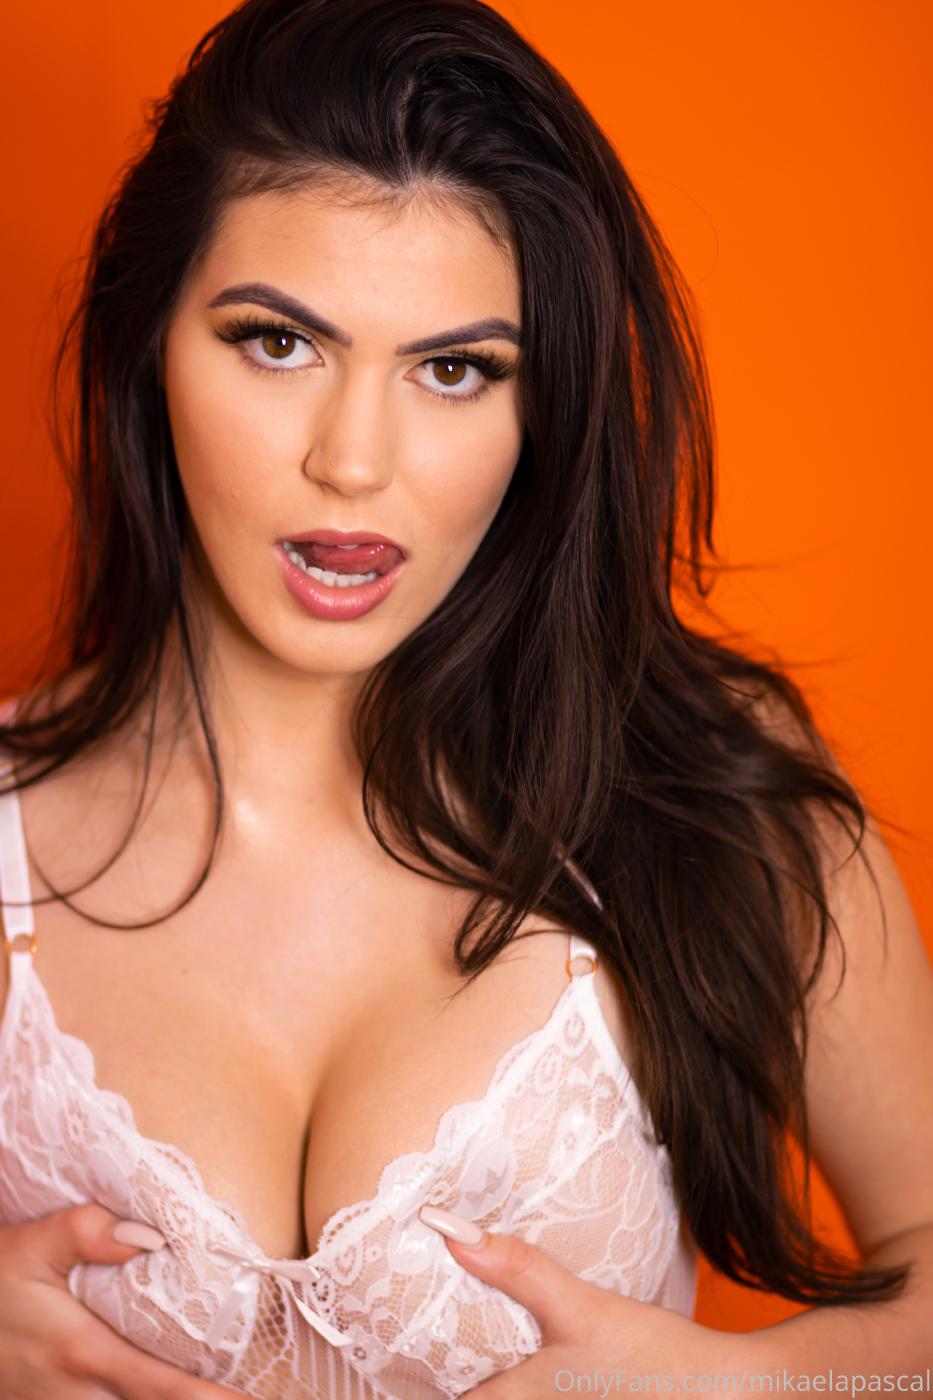 Mikaela Pascal Nude See Through Bodysuit Onlyfans Set nude.